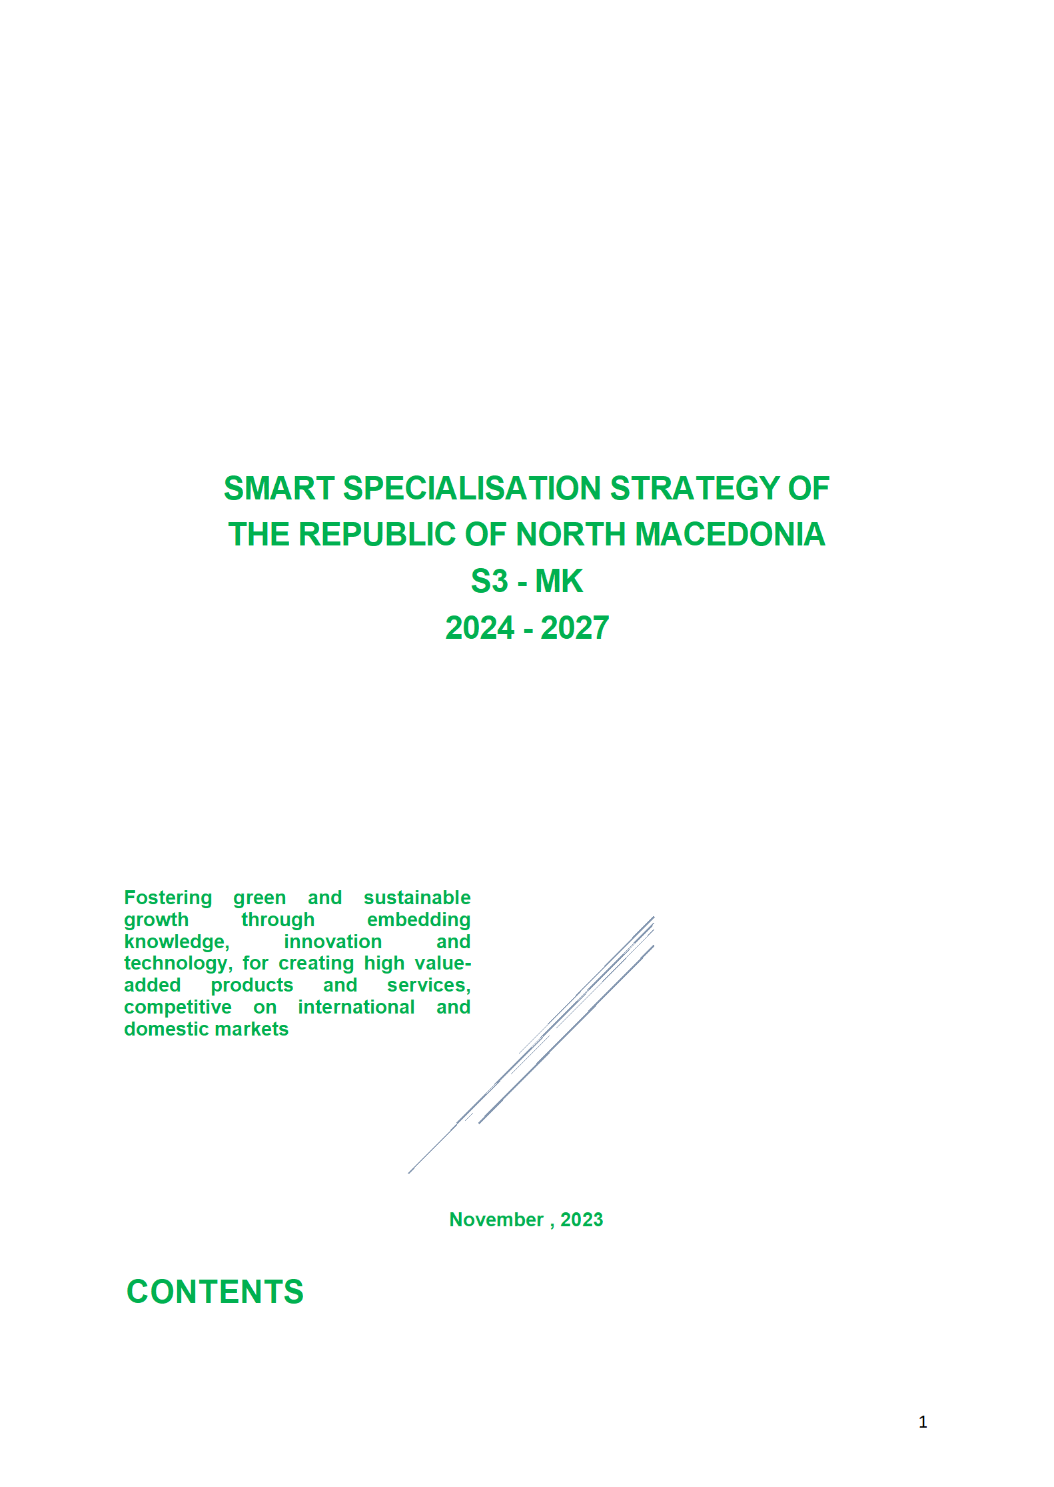 Smart Specialisation Strategy of the Republic of North Macedonia 2024-2027